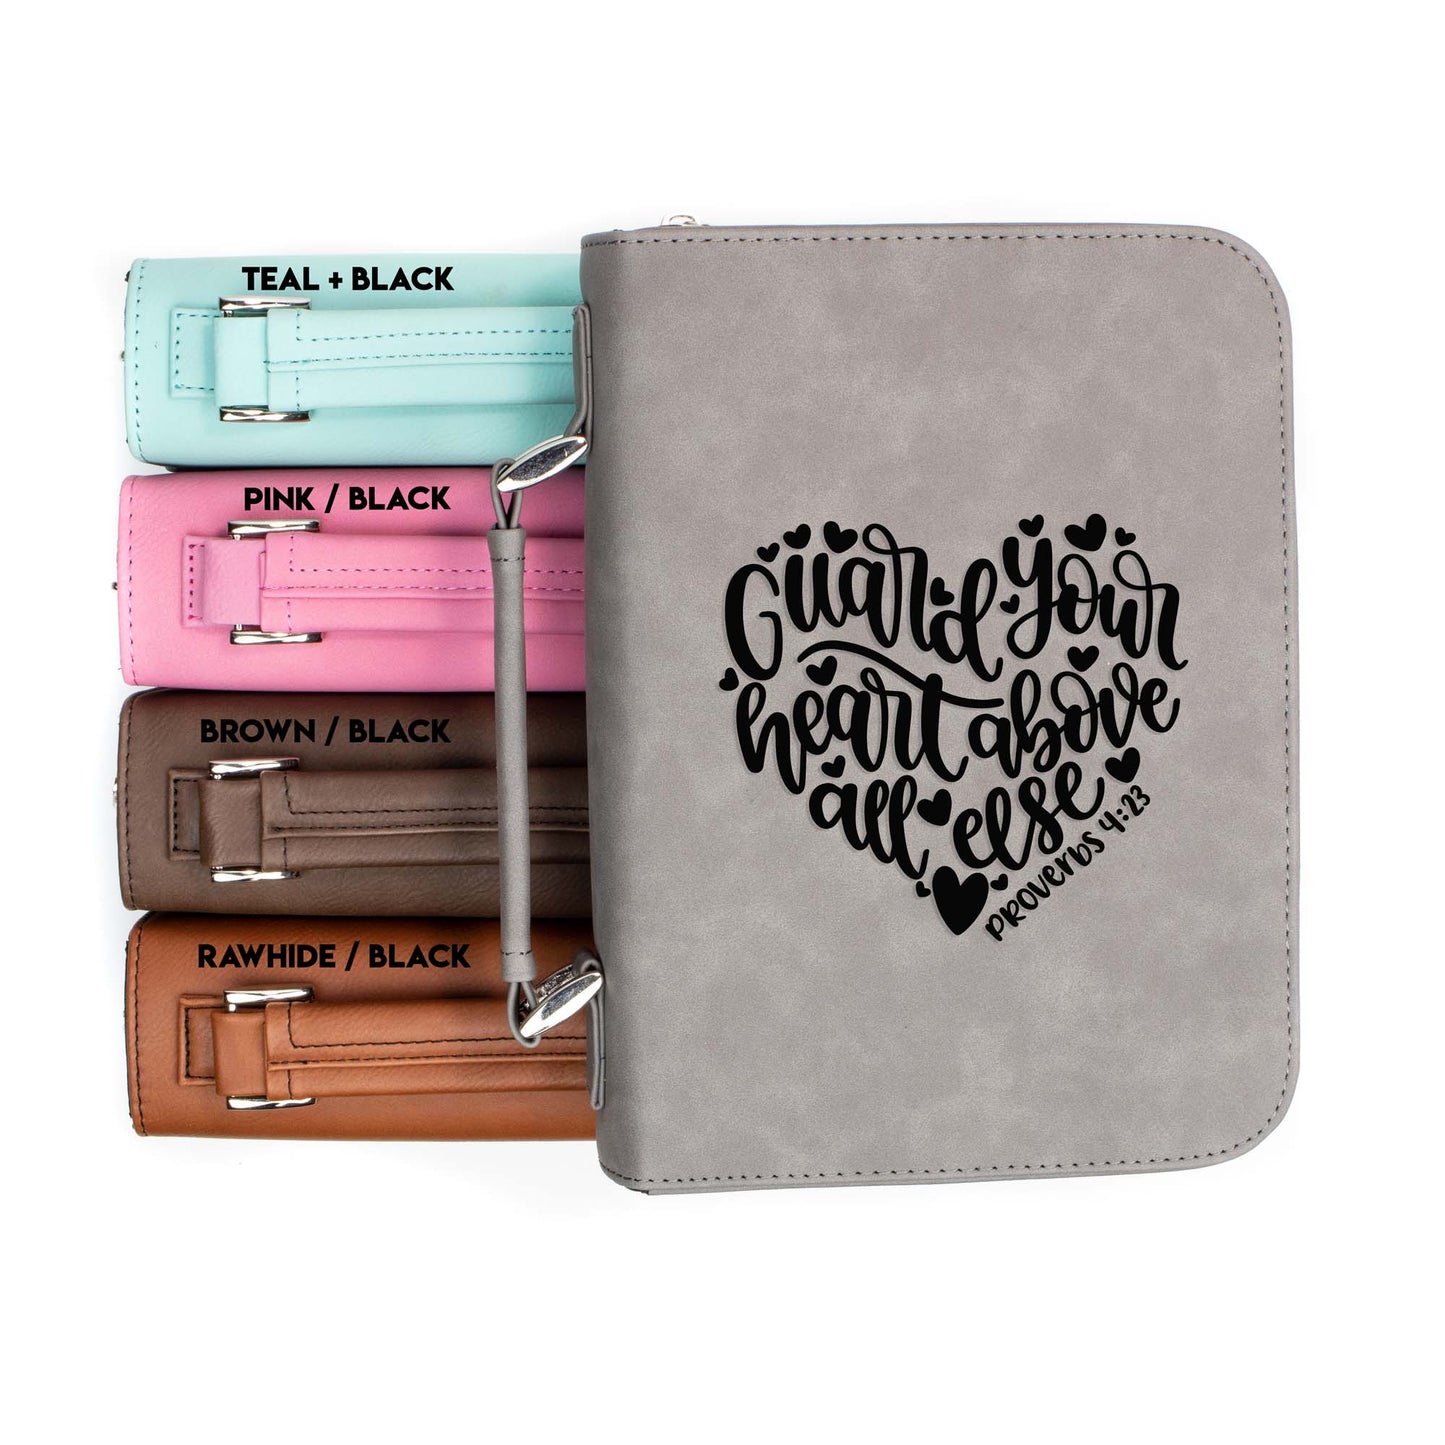 Guard Your Heart Above All Proverbs 4-23 Bible Cover | Faux Leather With Handle + Pockets